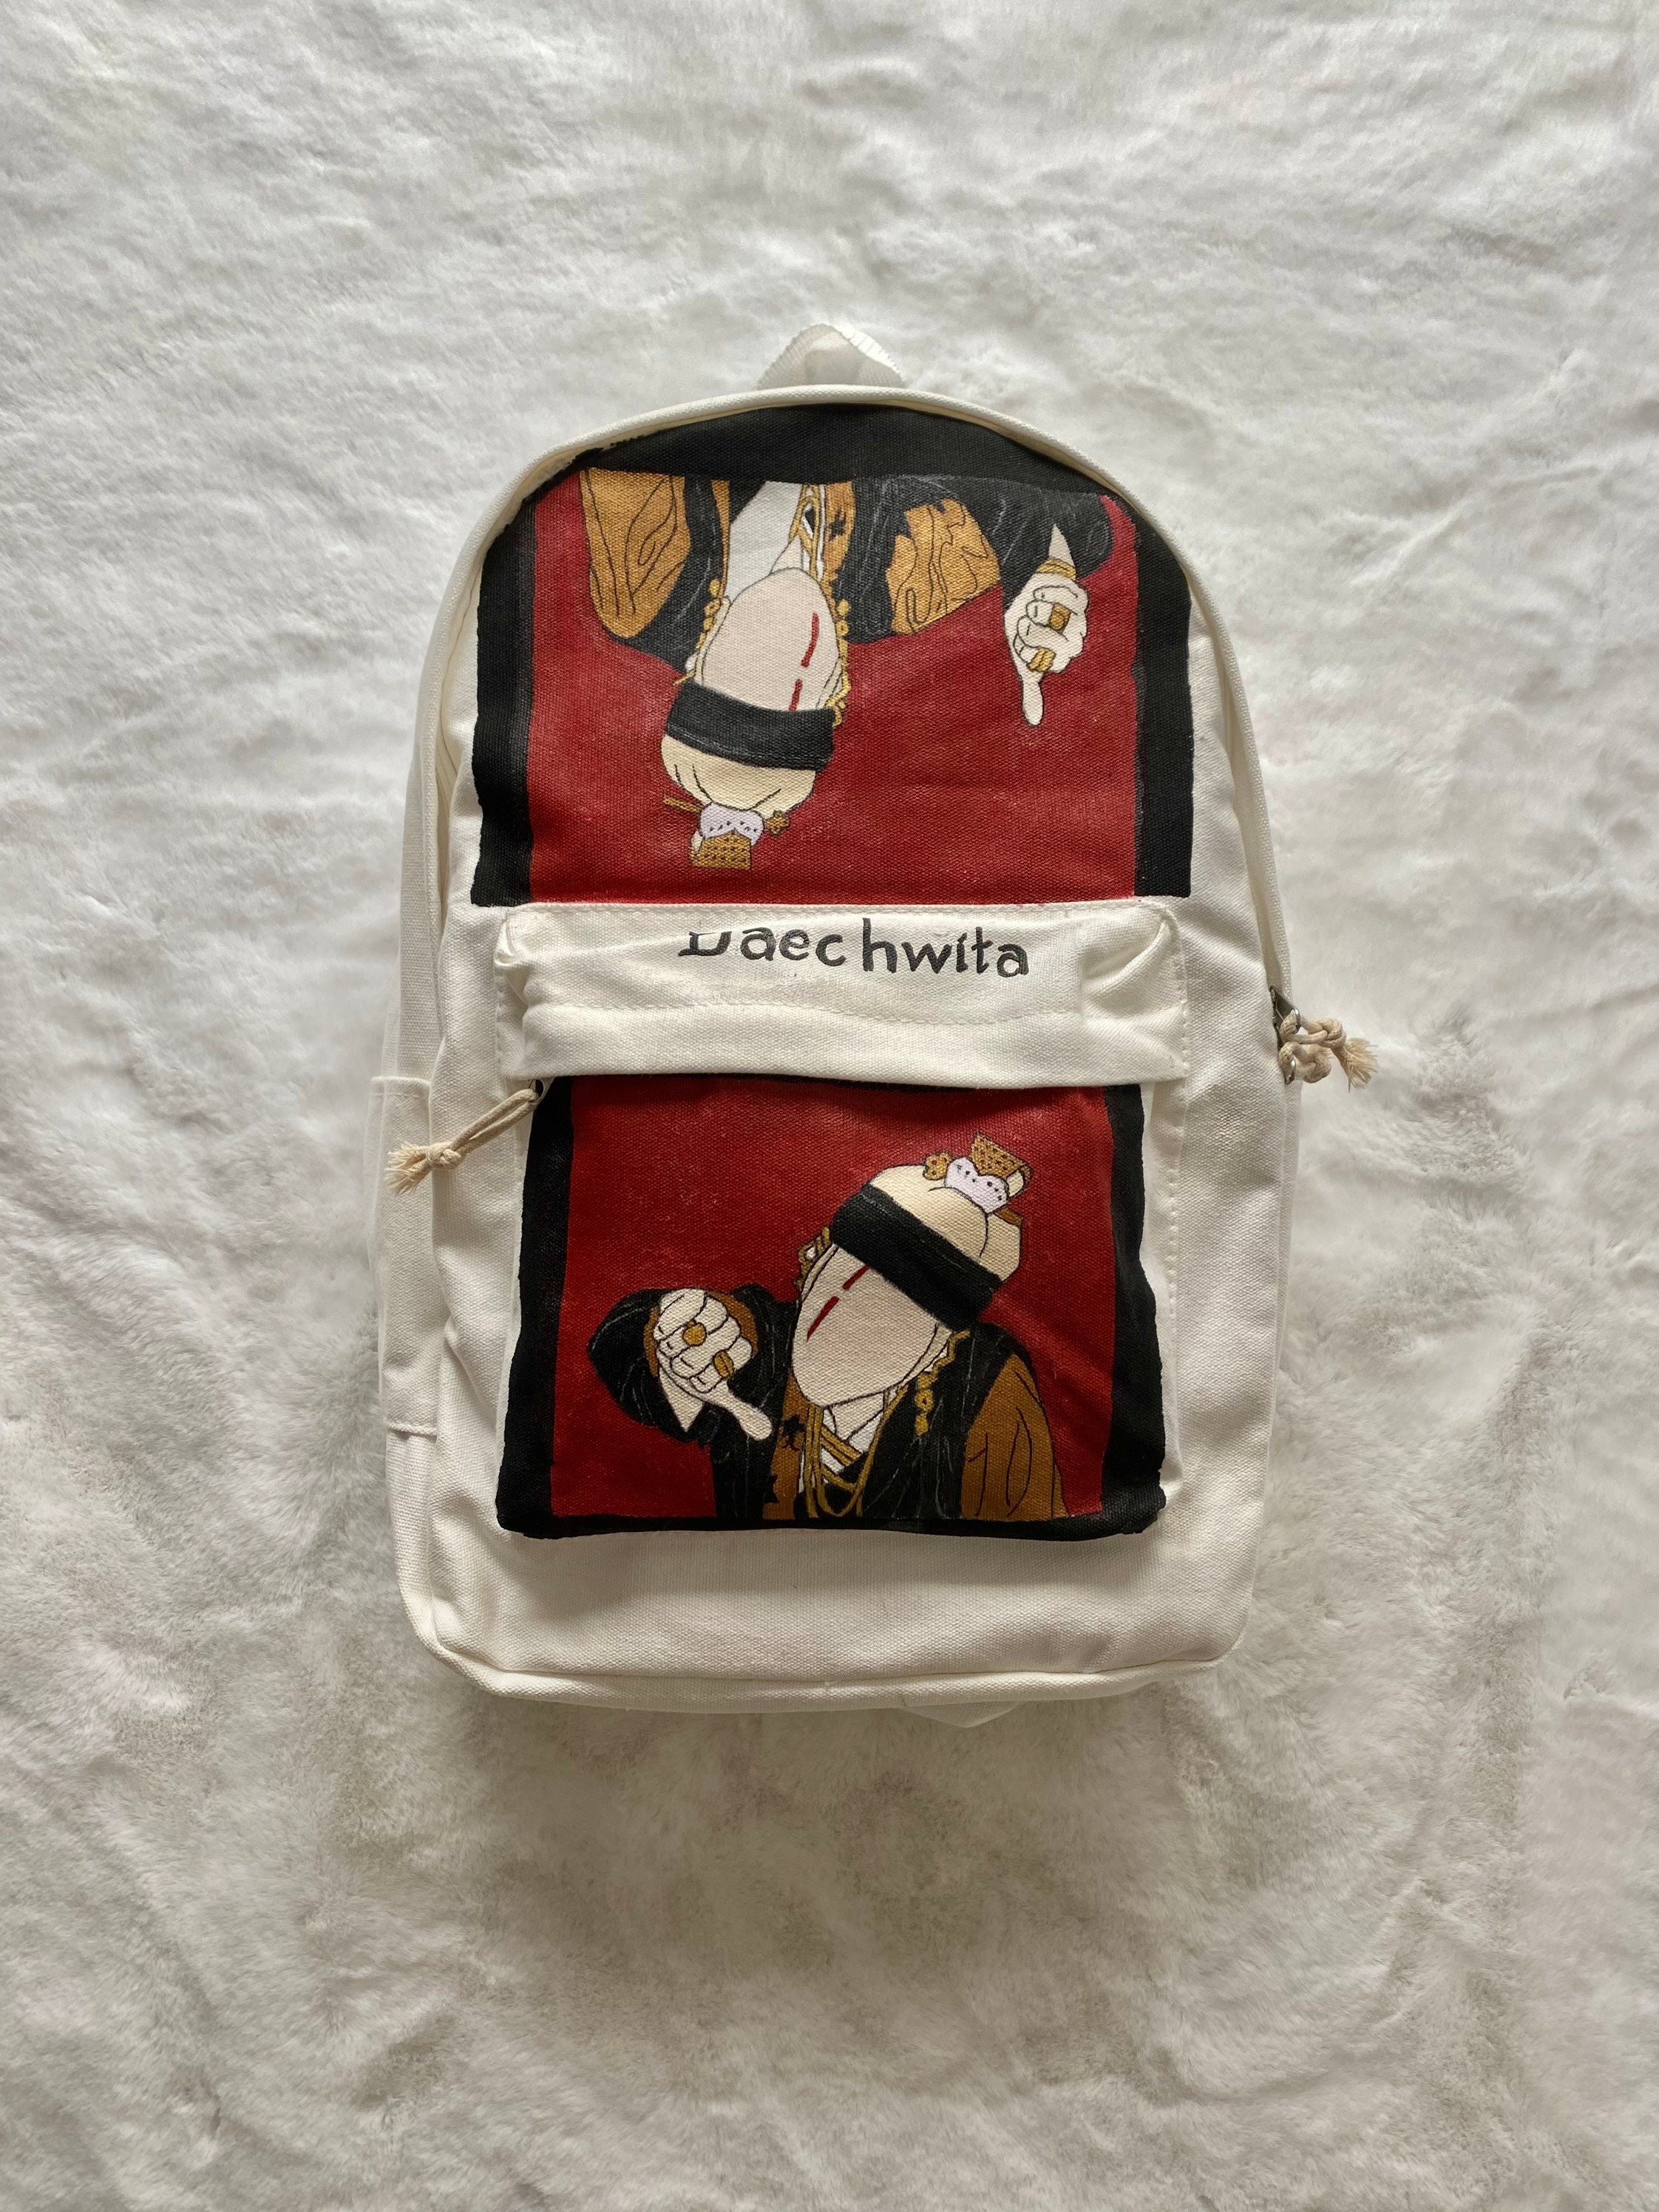 BTS Butter School Backpack Book Bag with free BTS necklace